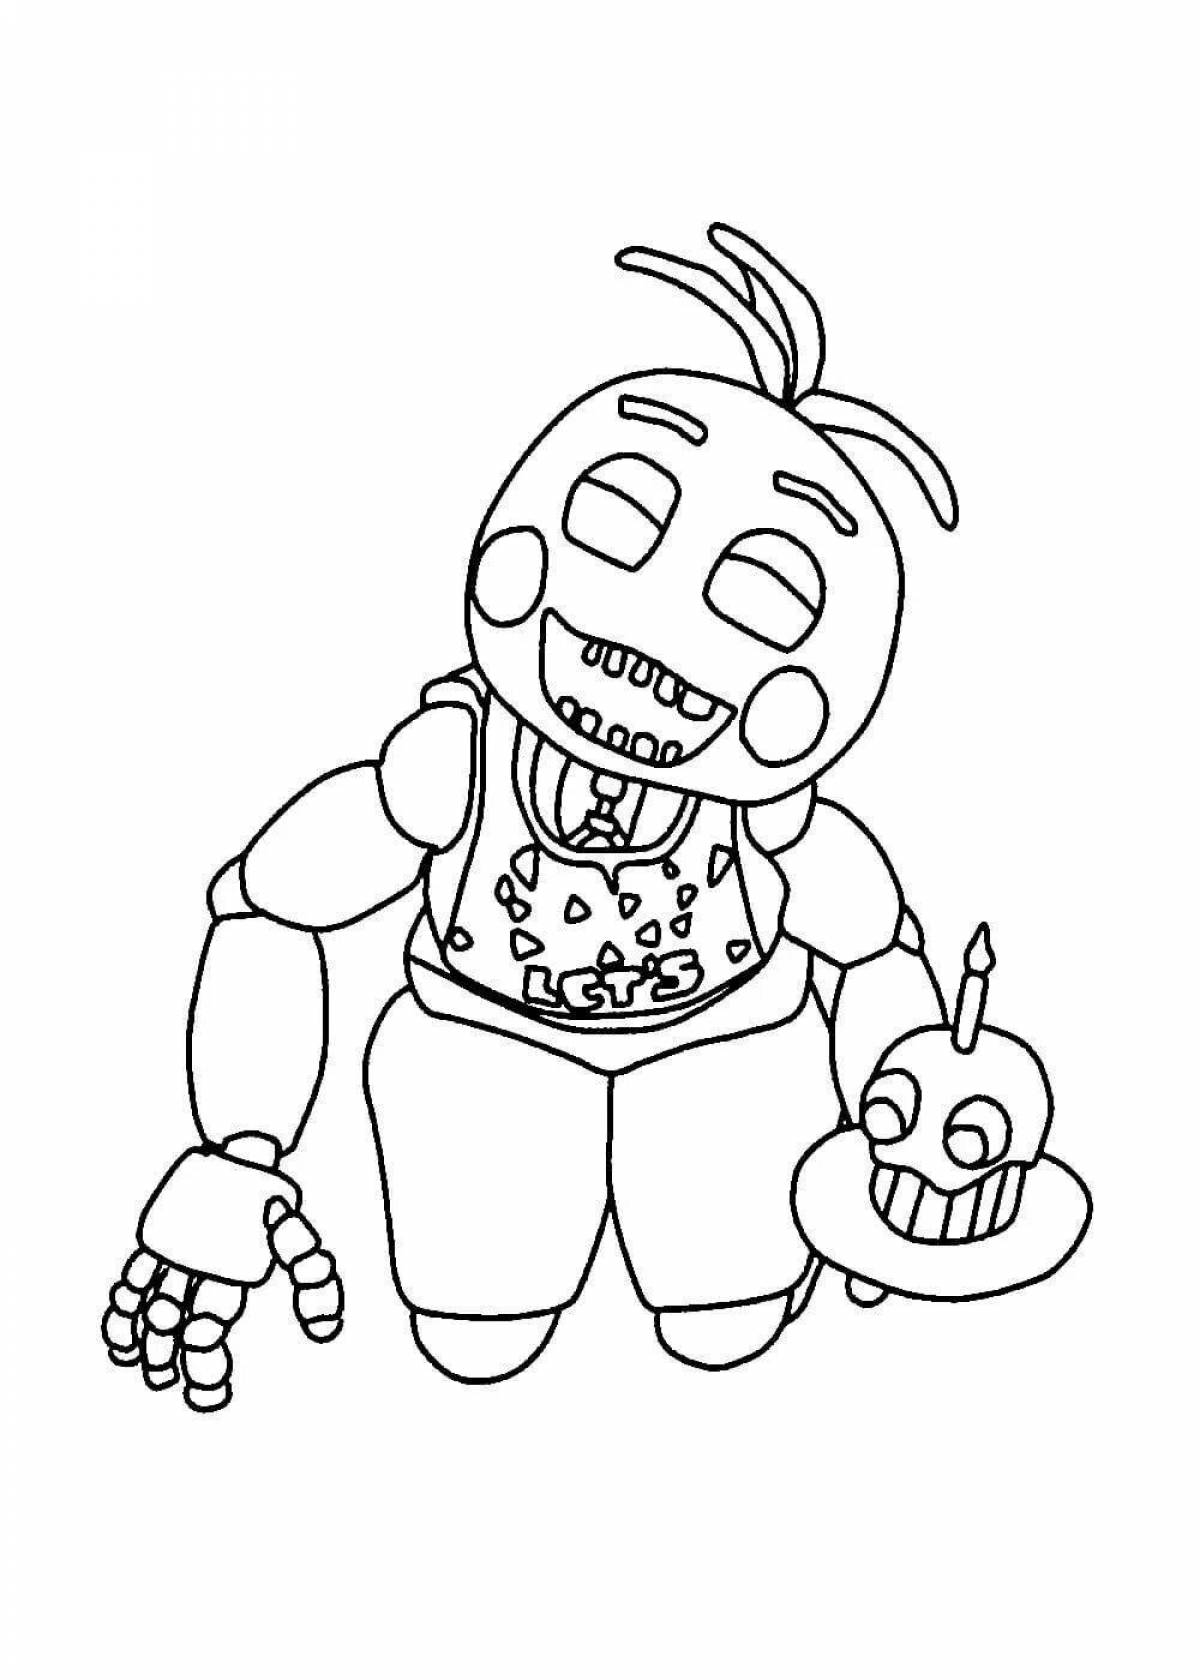 Great bonnie animatronic coloring book